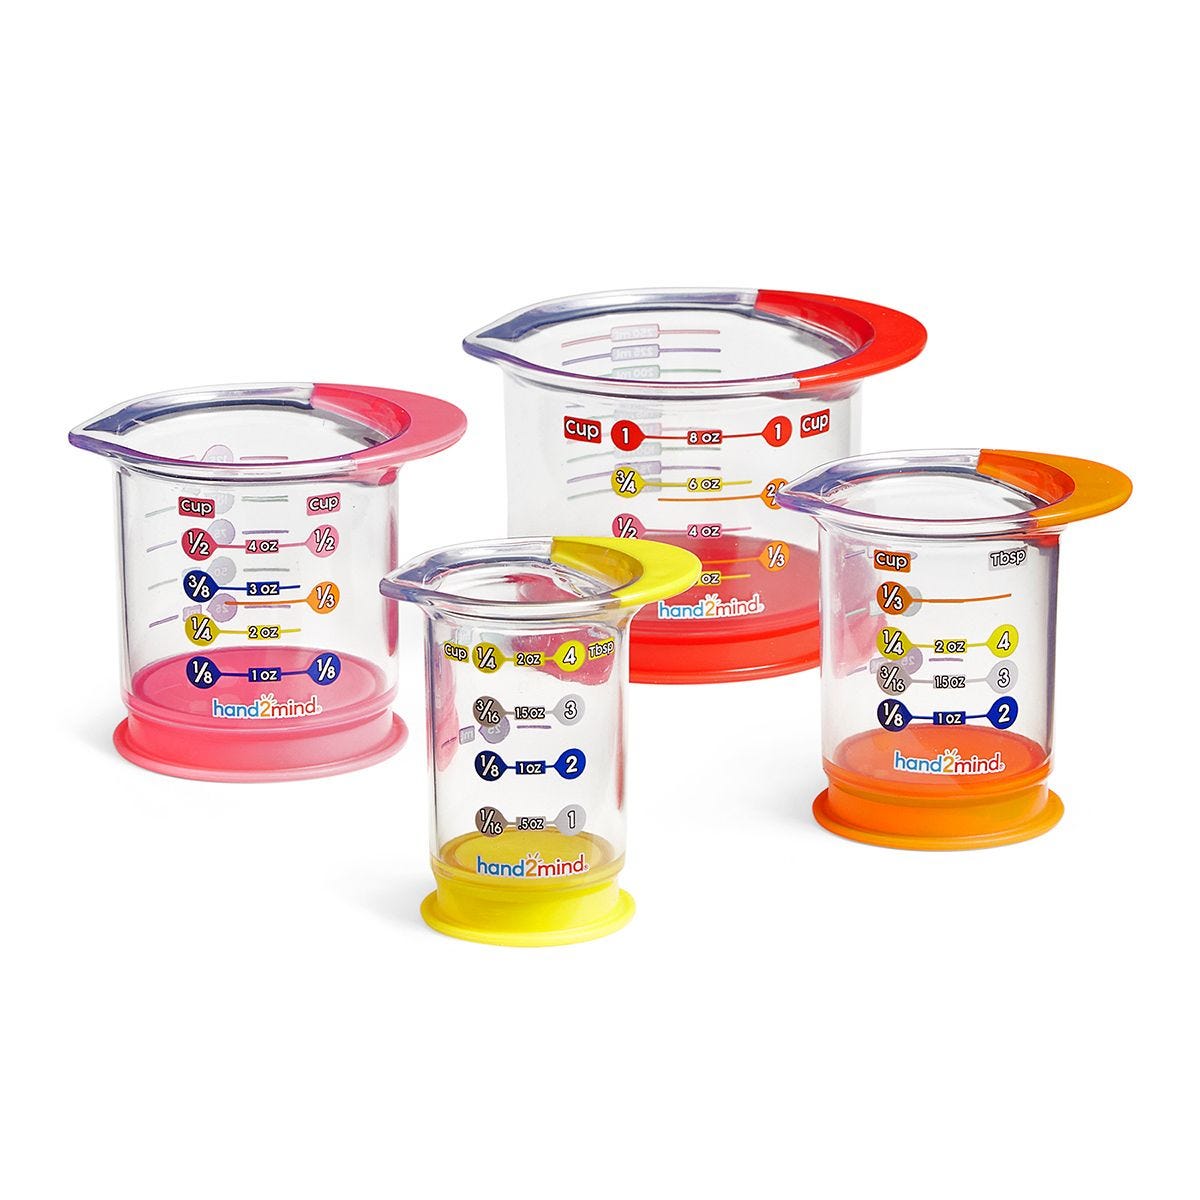 Measuring cup  Graduated cylinder, Measuring cups, Cooking tips